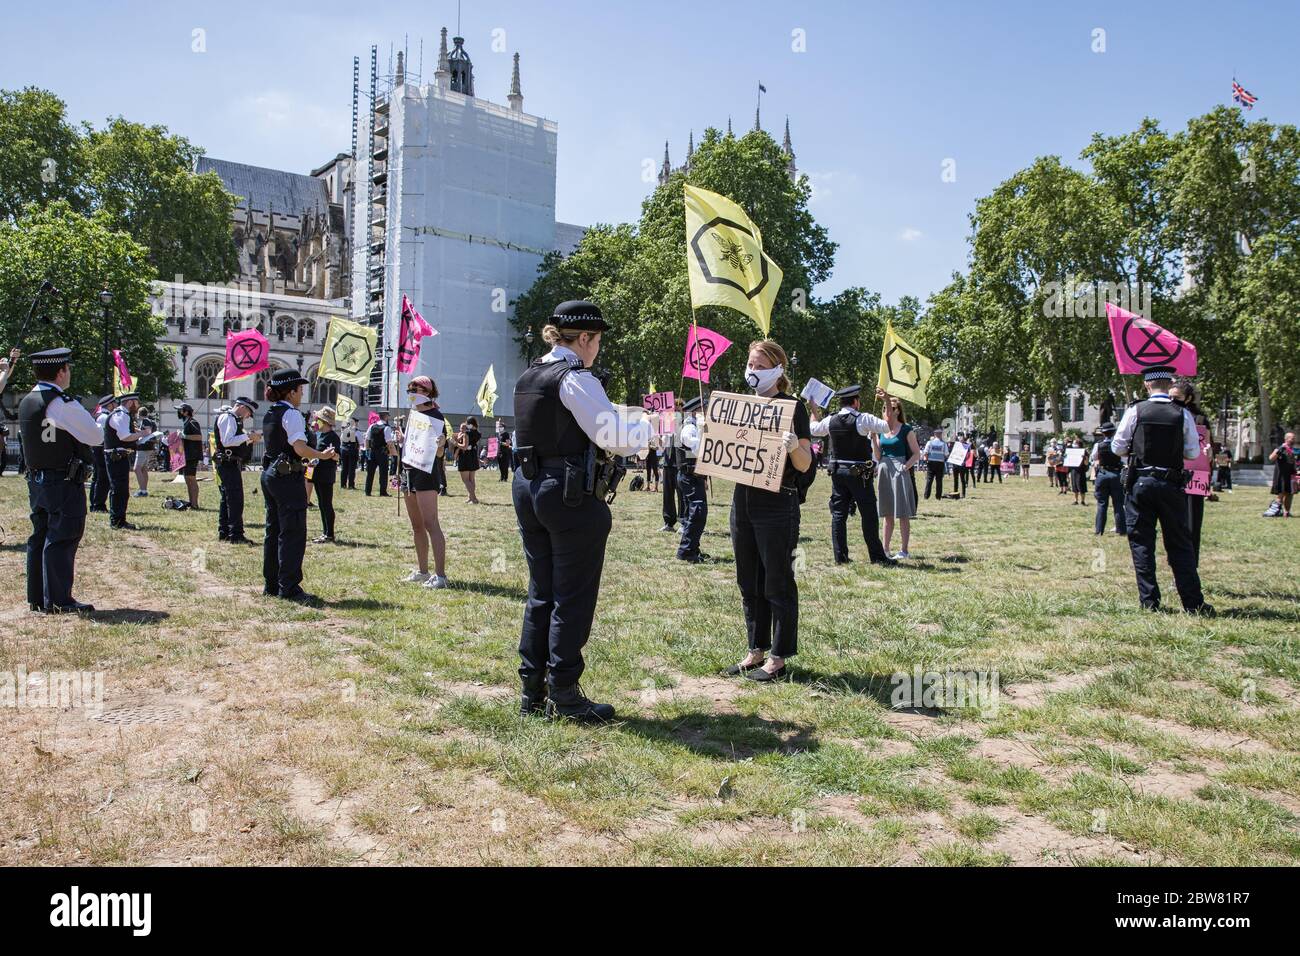 Parliament Square, London, UK. 30 May 2020. A few hundred environmental campaigners from Extinction Rebellion demonstrate peacefully in Parliament Square. Protesters hold placards, demand decisive action from the UK Government on the global environmental crisis. Activists are standing and maintain appropriate social distancing. Police questions individual campaigners prompting them to move on; some are body searched and arrests follow for breach of Covid-19 regulations. Stock Photo